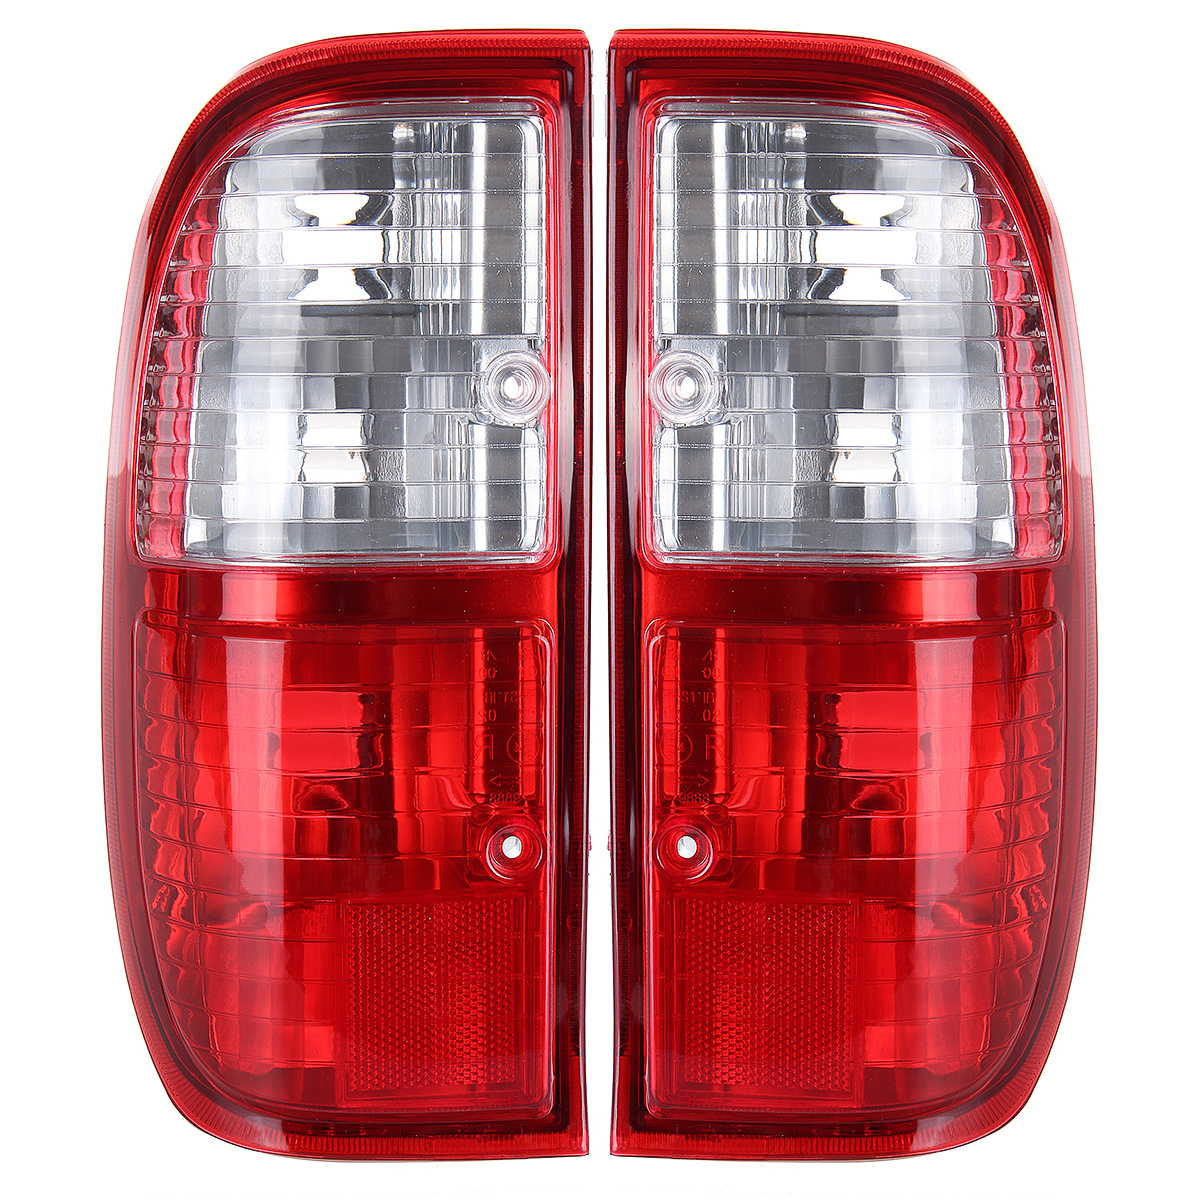 

Car Rear Left/Right Tail Light Brake Lamp with No Wiring For Ford Ranger 1998 - 2006